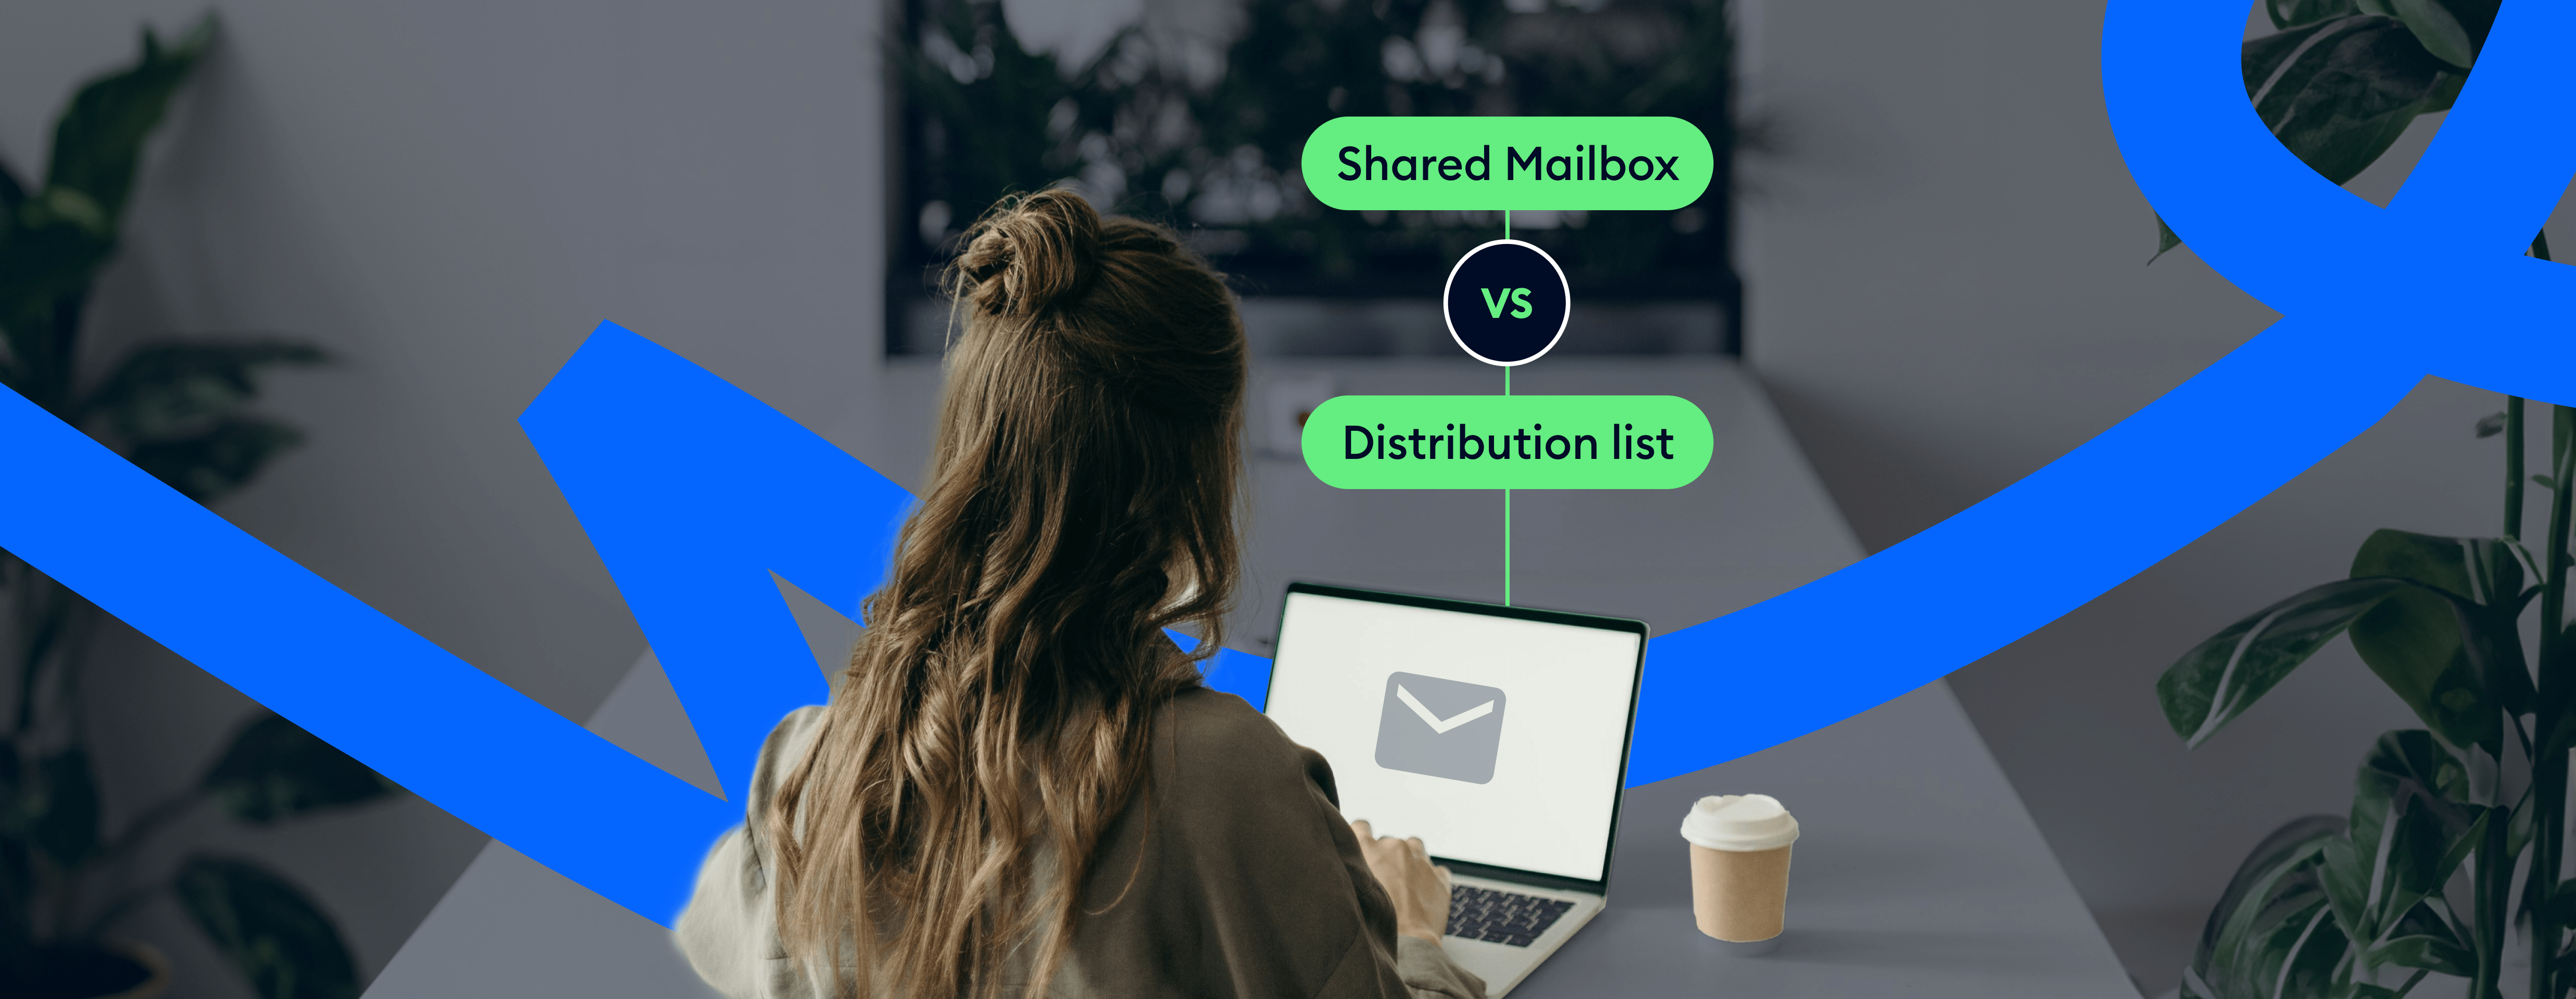 distribution list vs shared mailbox cover image